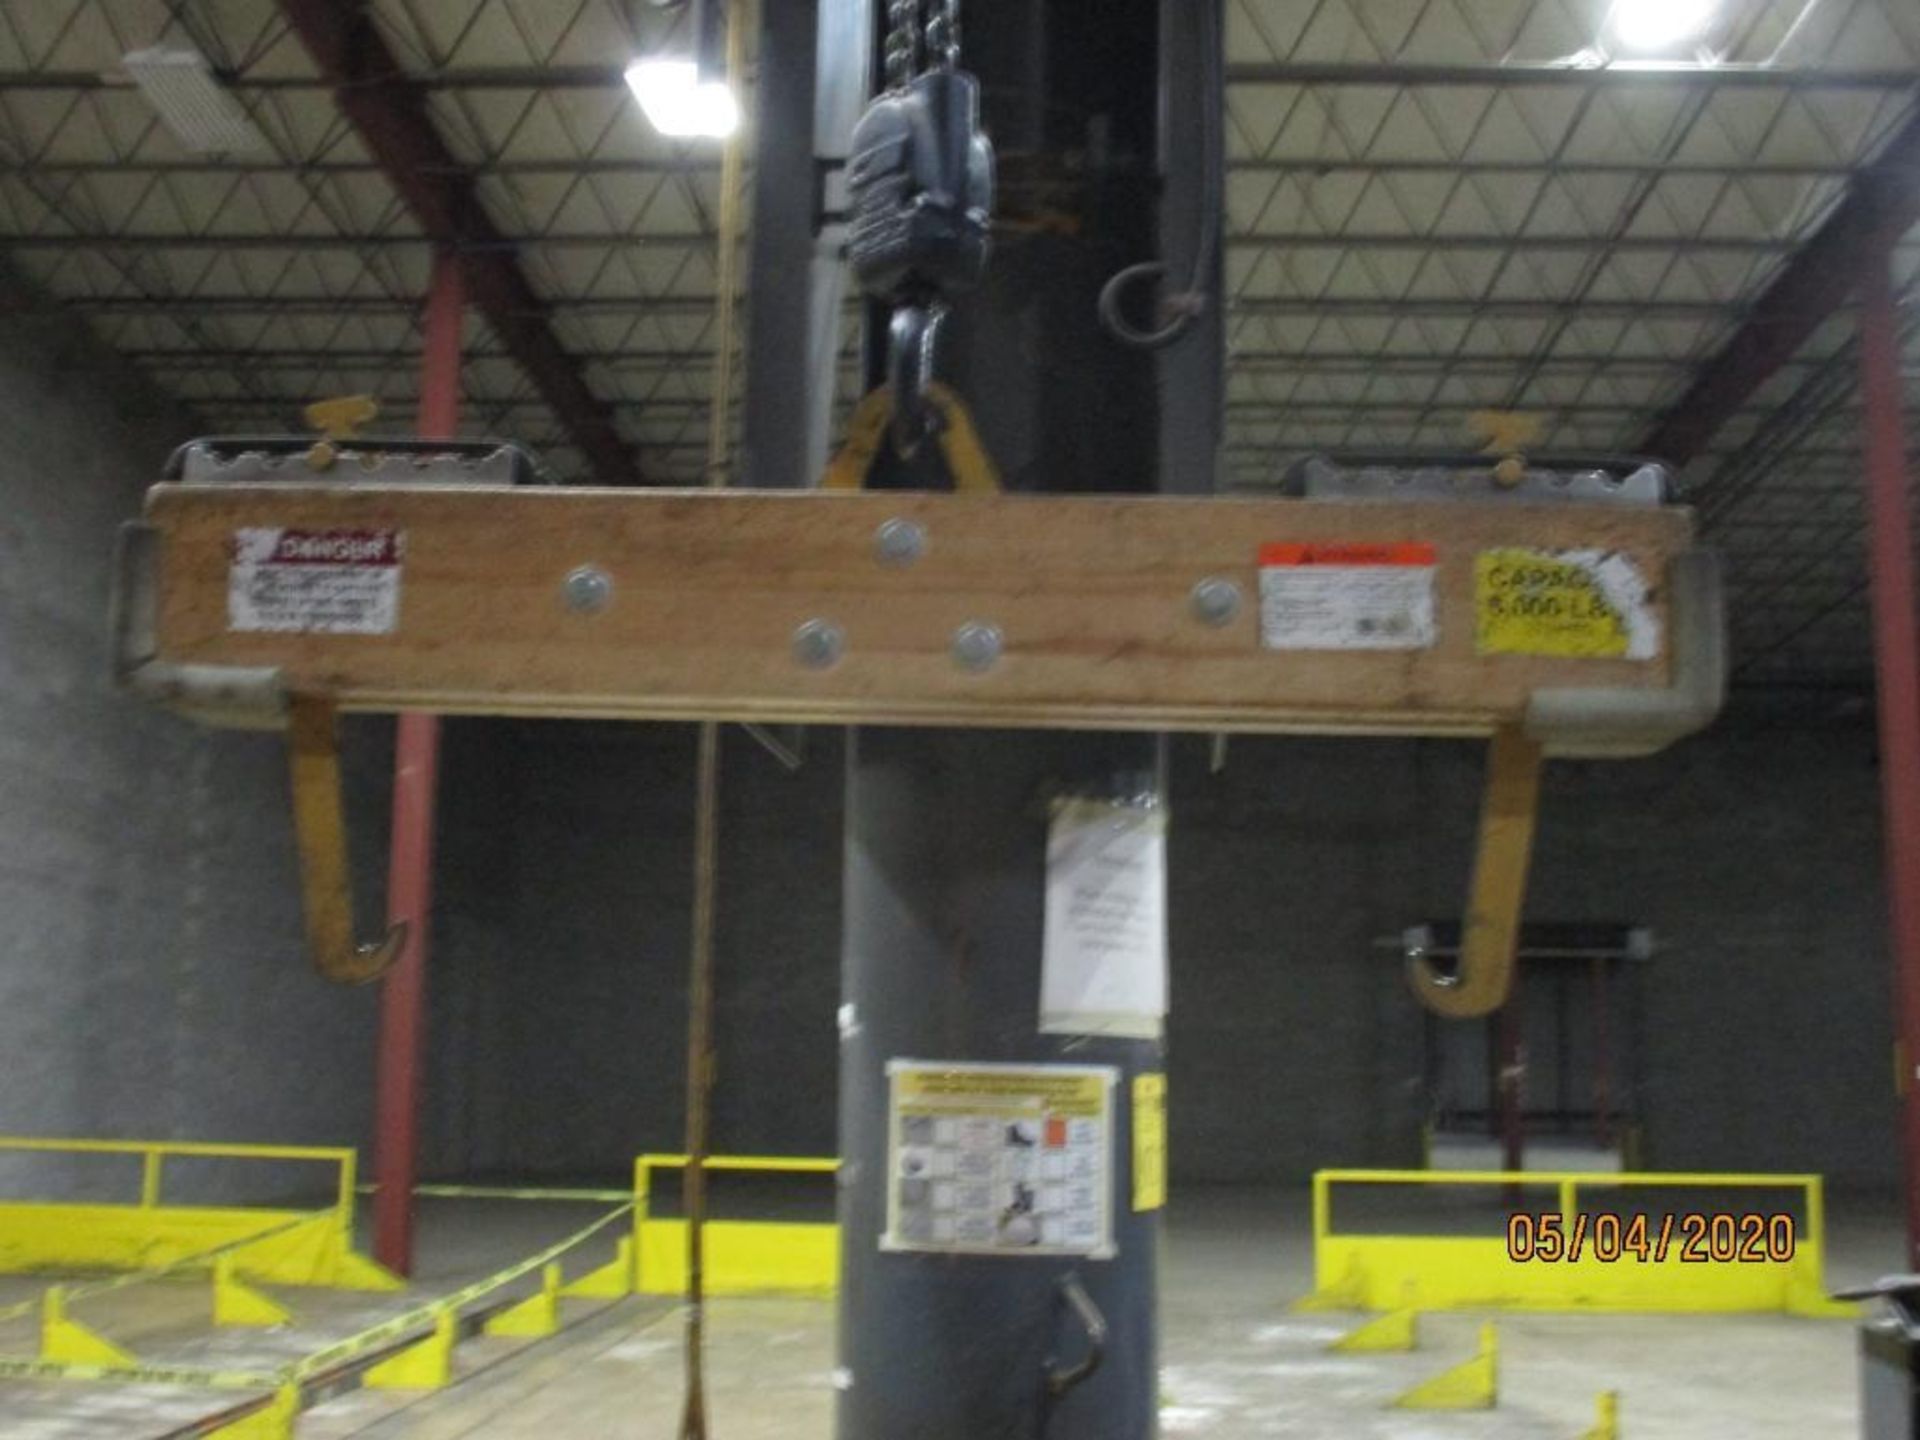 Abell-Howe 2-Ton Jib Crane With 2-Ton C.M. Lodestar Hoist And 6,000lb Battery Lifter, 13.6ft Tall x - Image 5 of 5